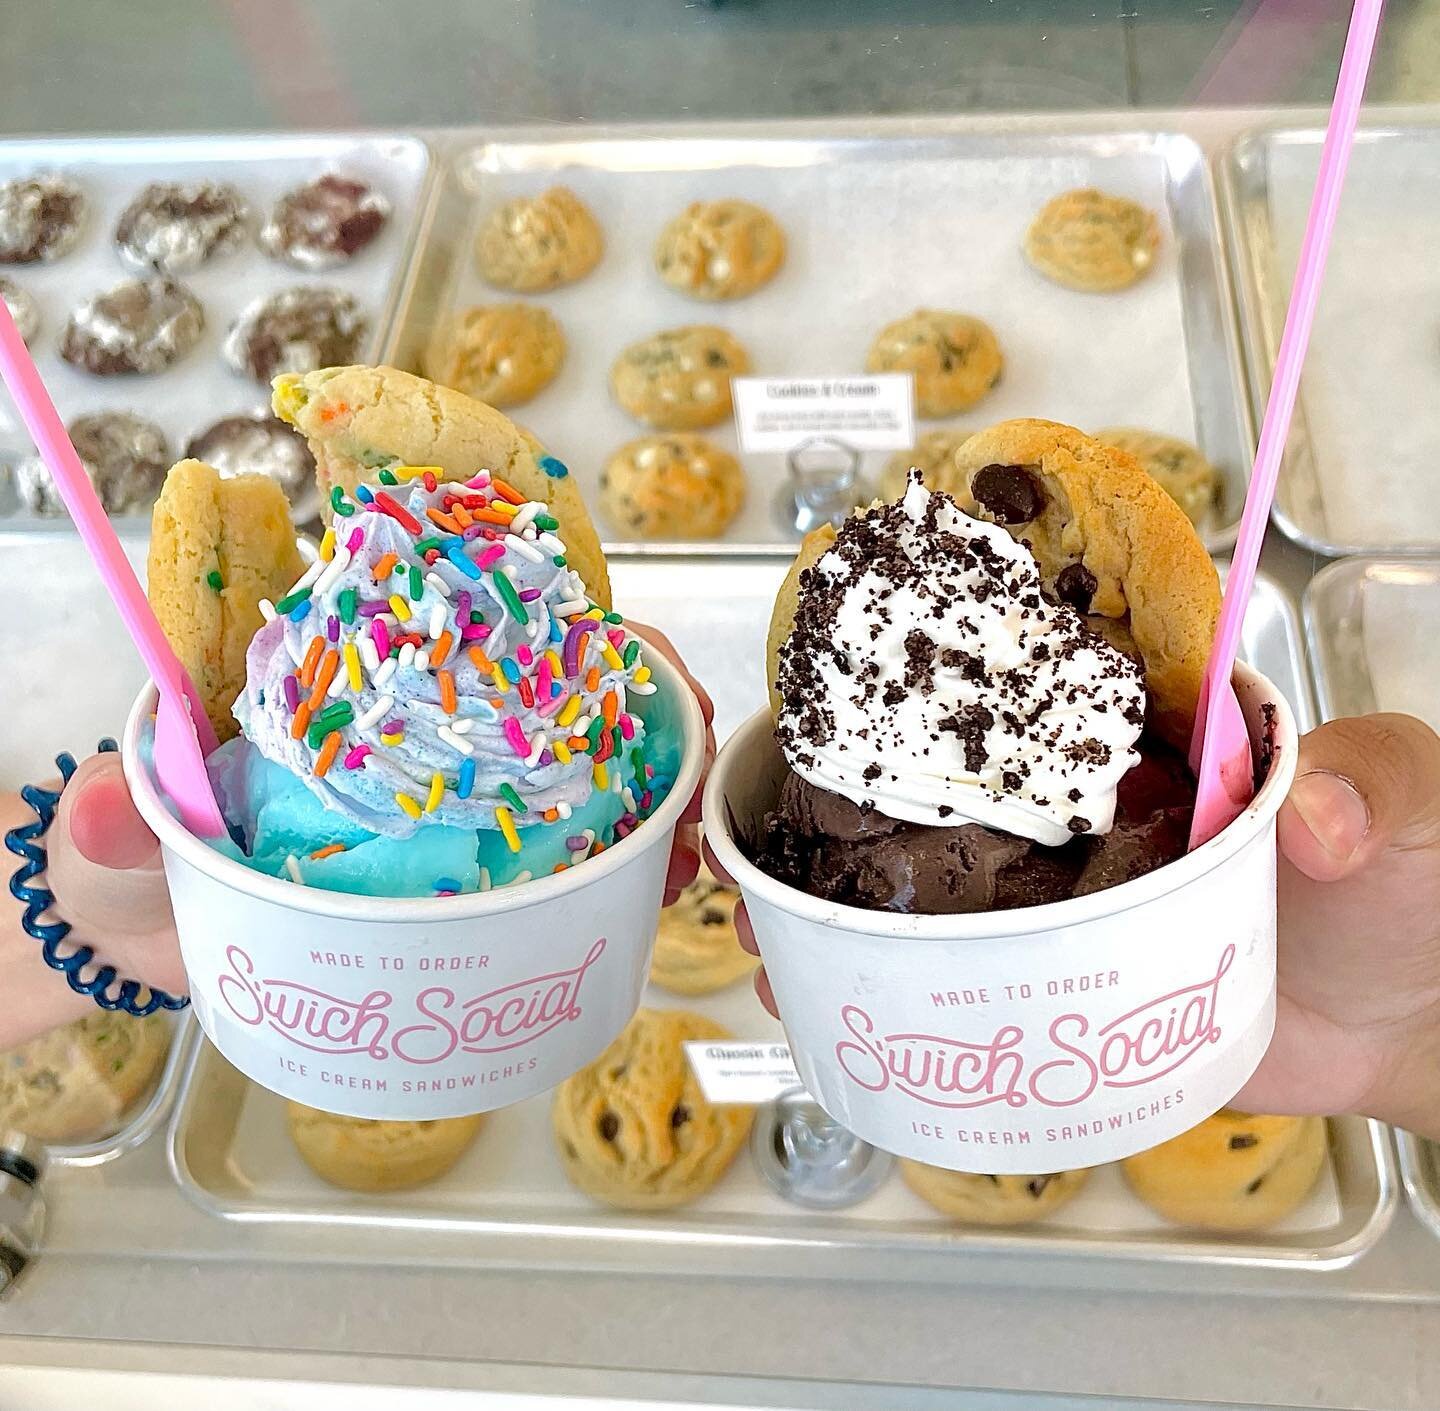 2 sundaes are always better than 1 🍪🍦🕺🕺

Holiday Weekend Hours:
Friday: 5-10pm
Saturday: 12-10pm
Sunday: Closed
Monday: Closed

🍪Confetti Sugar and Chocolate Chip
🍦Blue Moon and Zanzibar Chocolate
🍫Whipped Cream, Confetti Sprinkles, Crushed Or